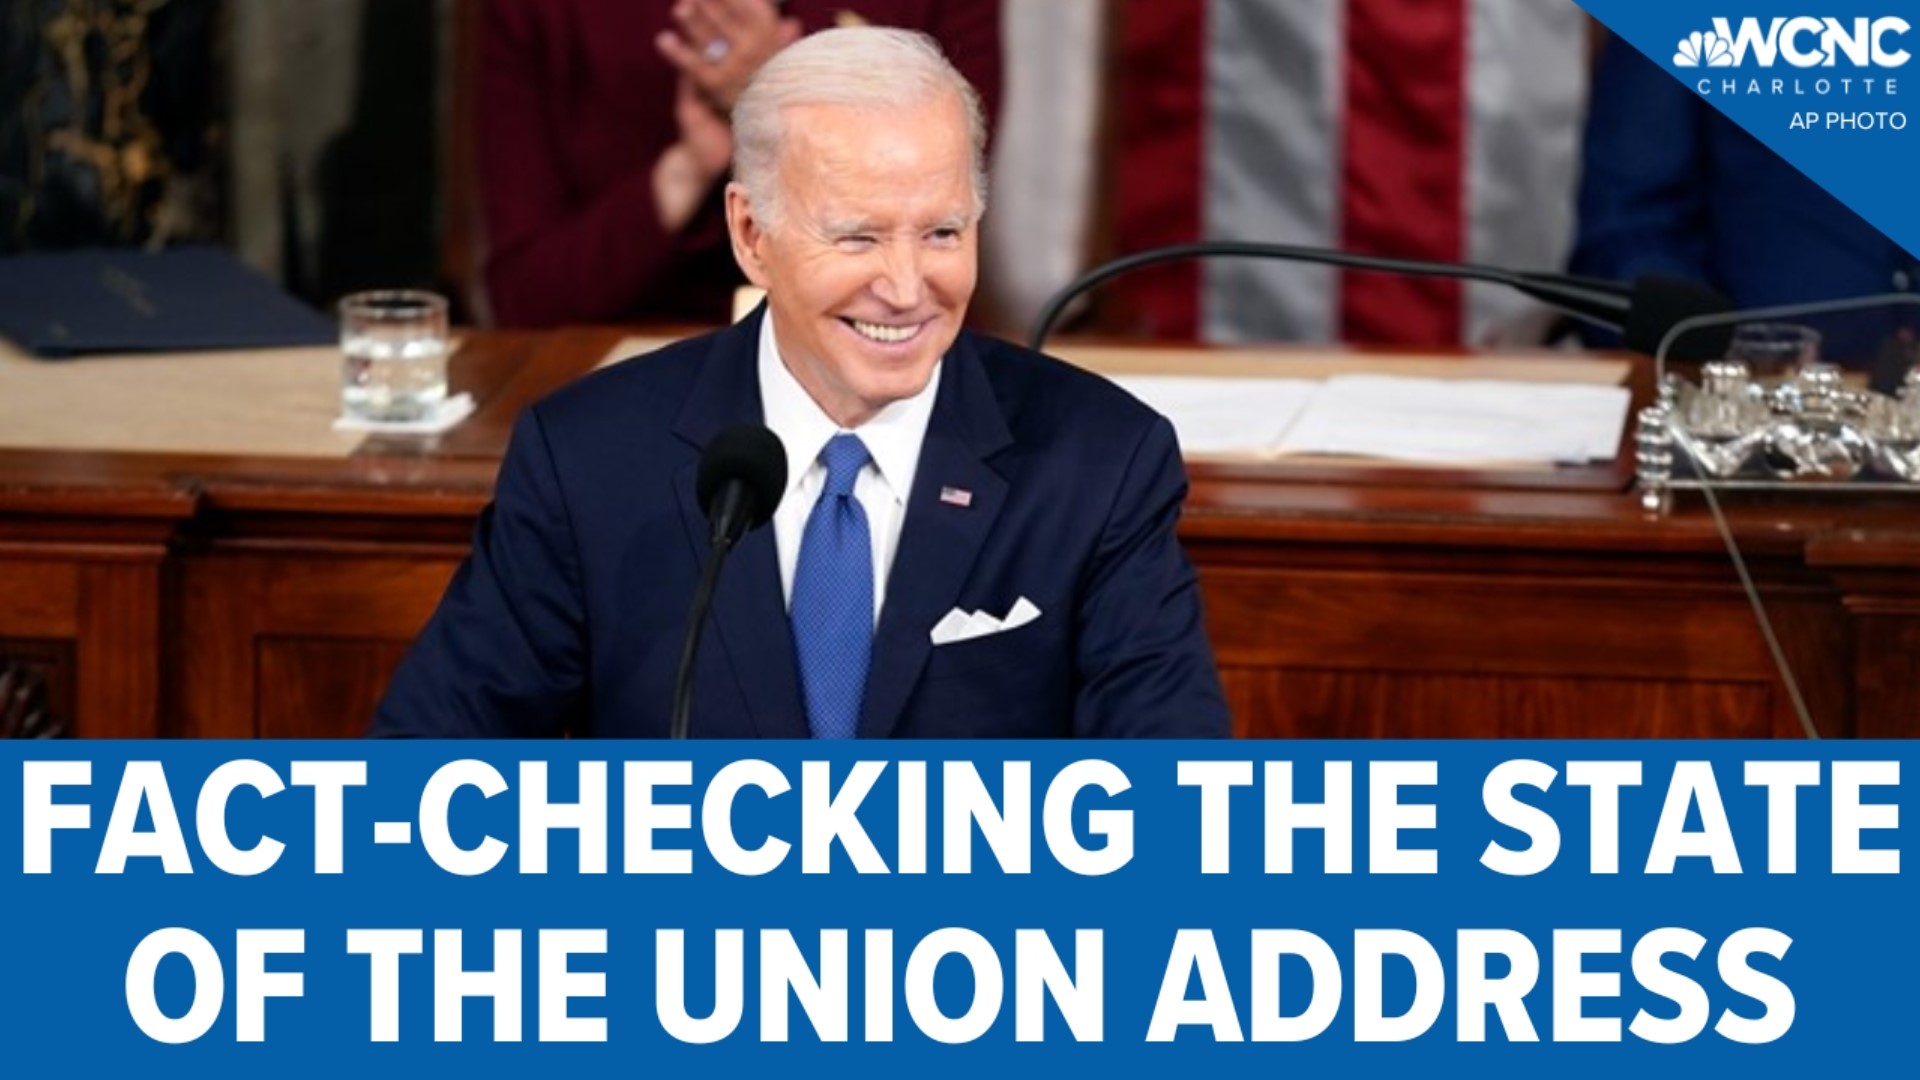 The VERIFY team is fact-checking claims from Biden’s address.